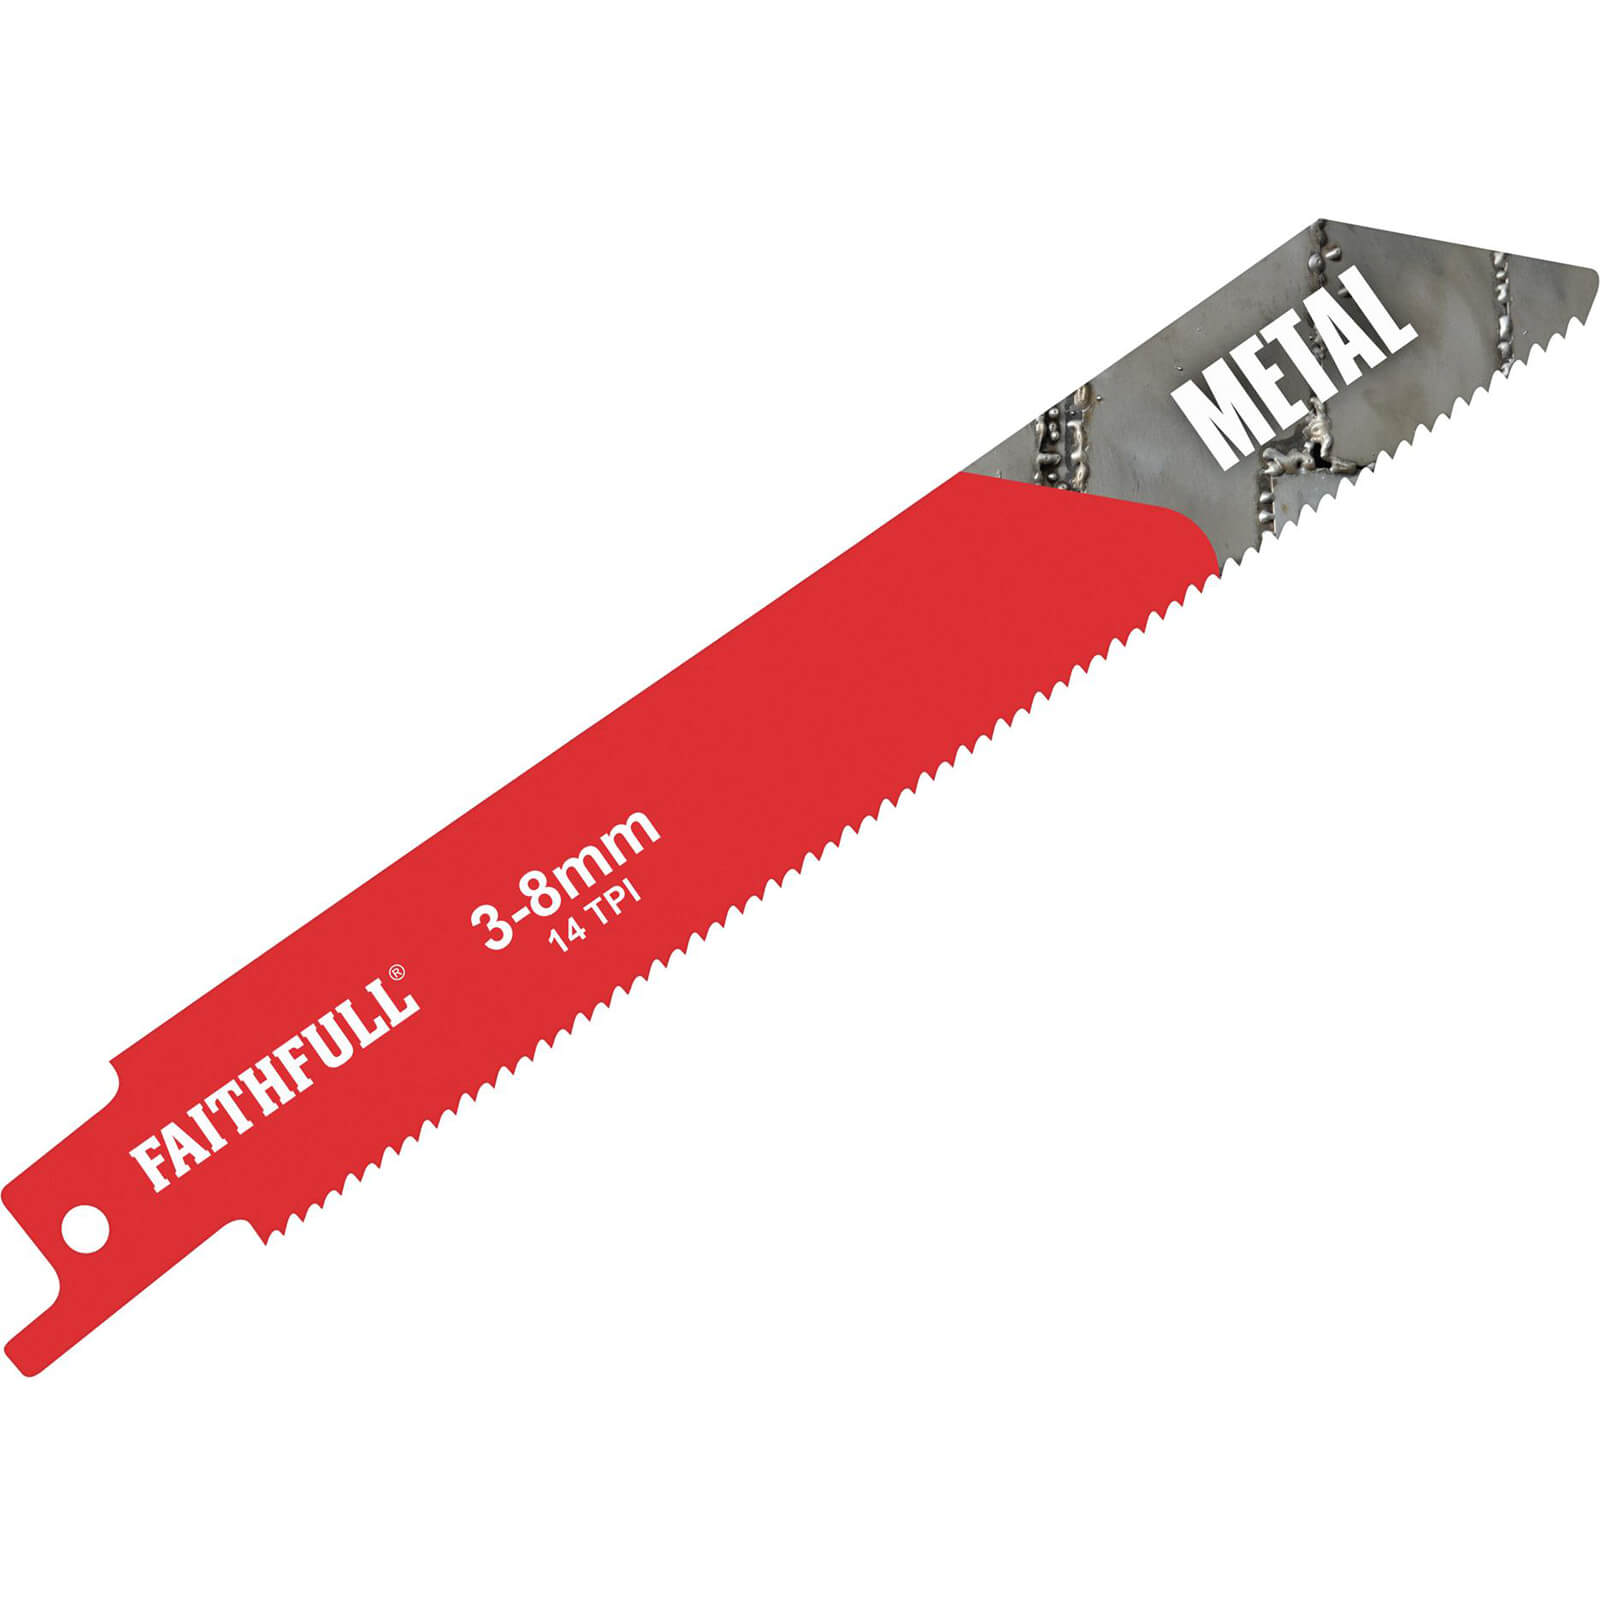 Image of Faithfull S922Bf Metal Reciprocating Sabre Saw Blades 150mm Pack of 5